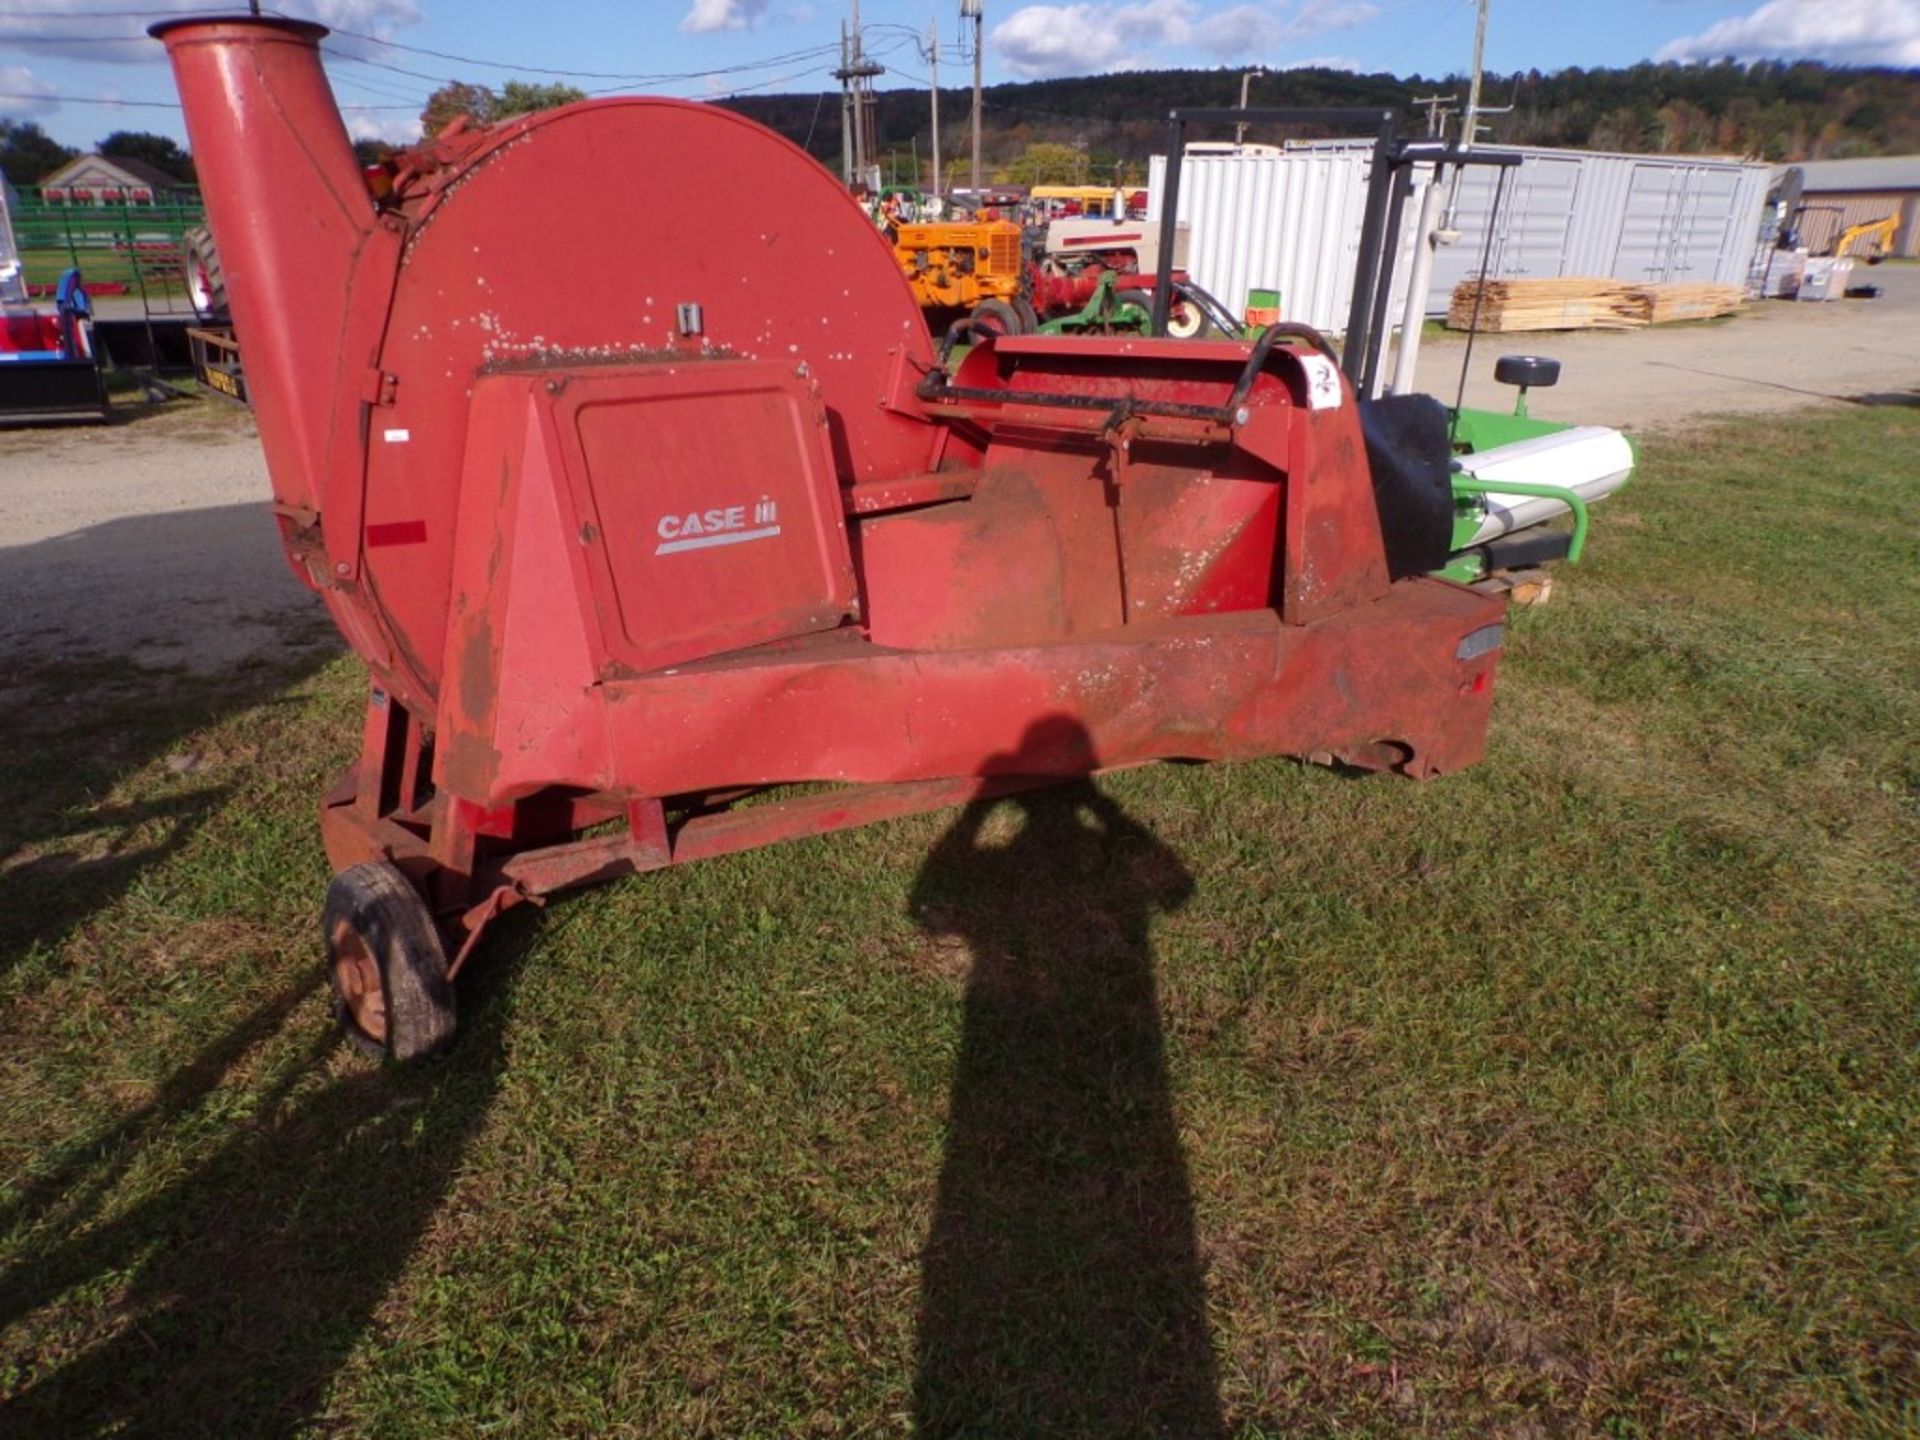 Case IH Model 600, Towable, PTO Blower, S/N: 032574 (5088) - Image 4 of 4